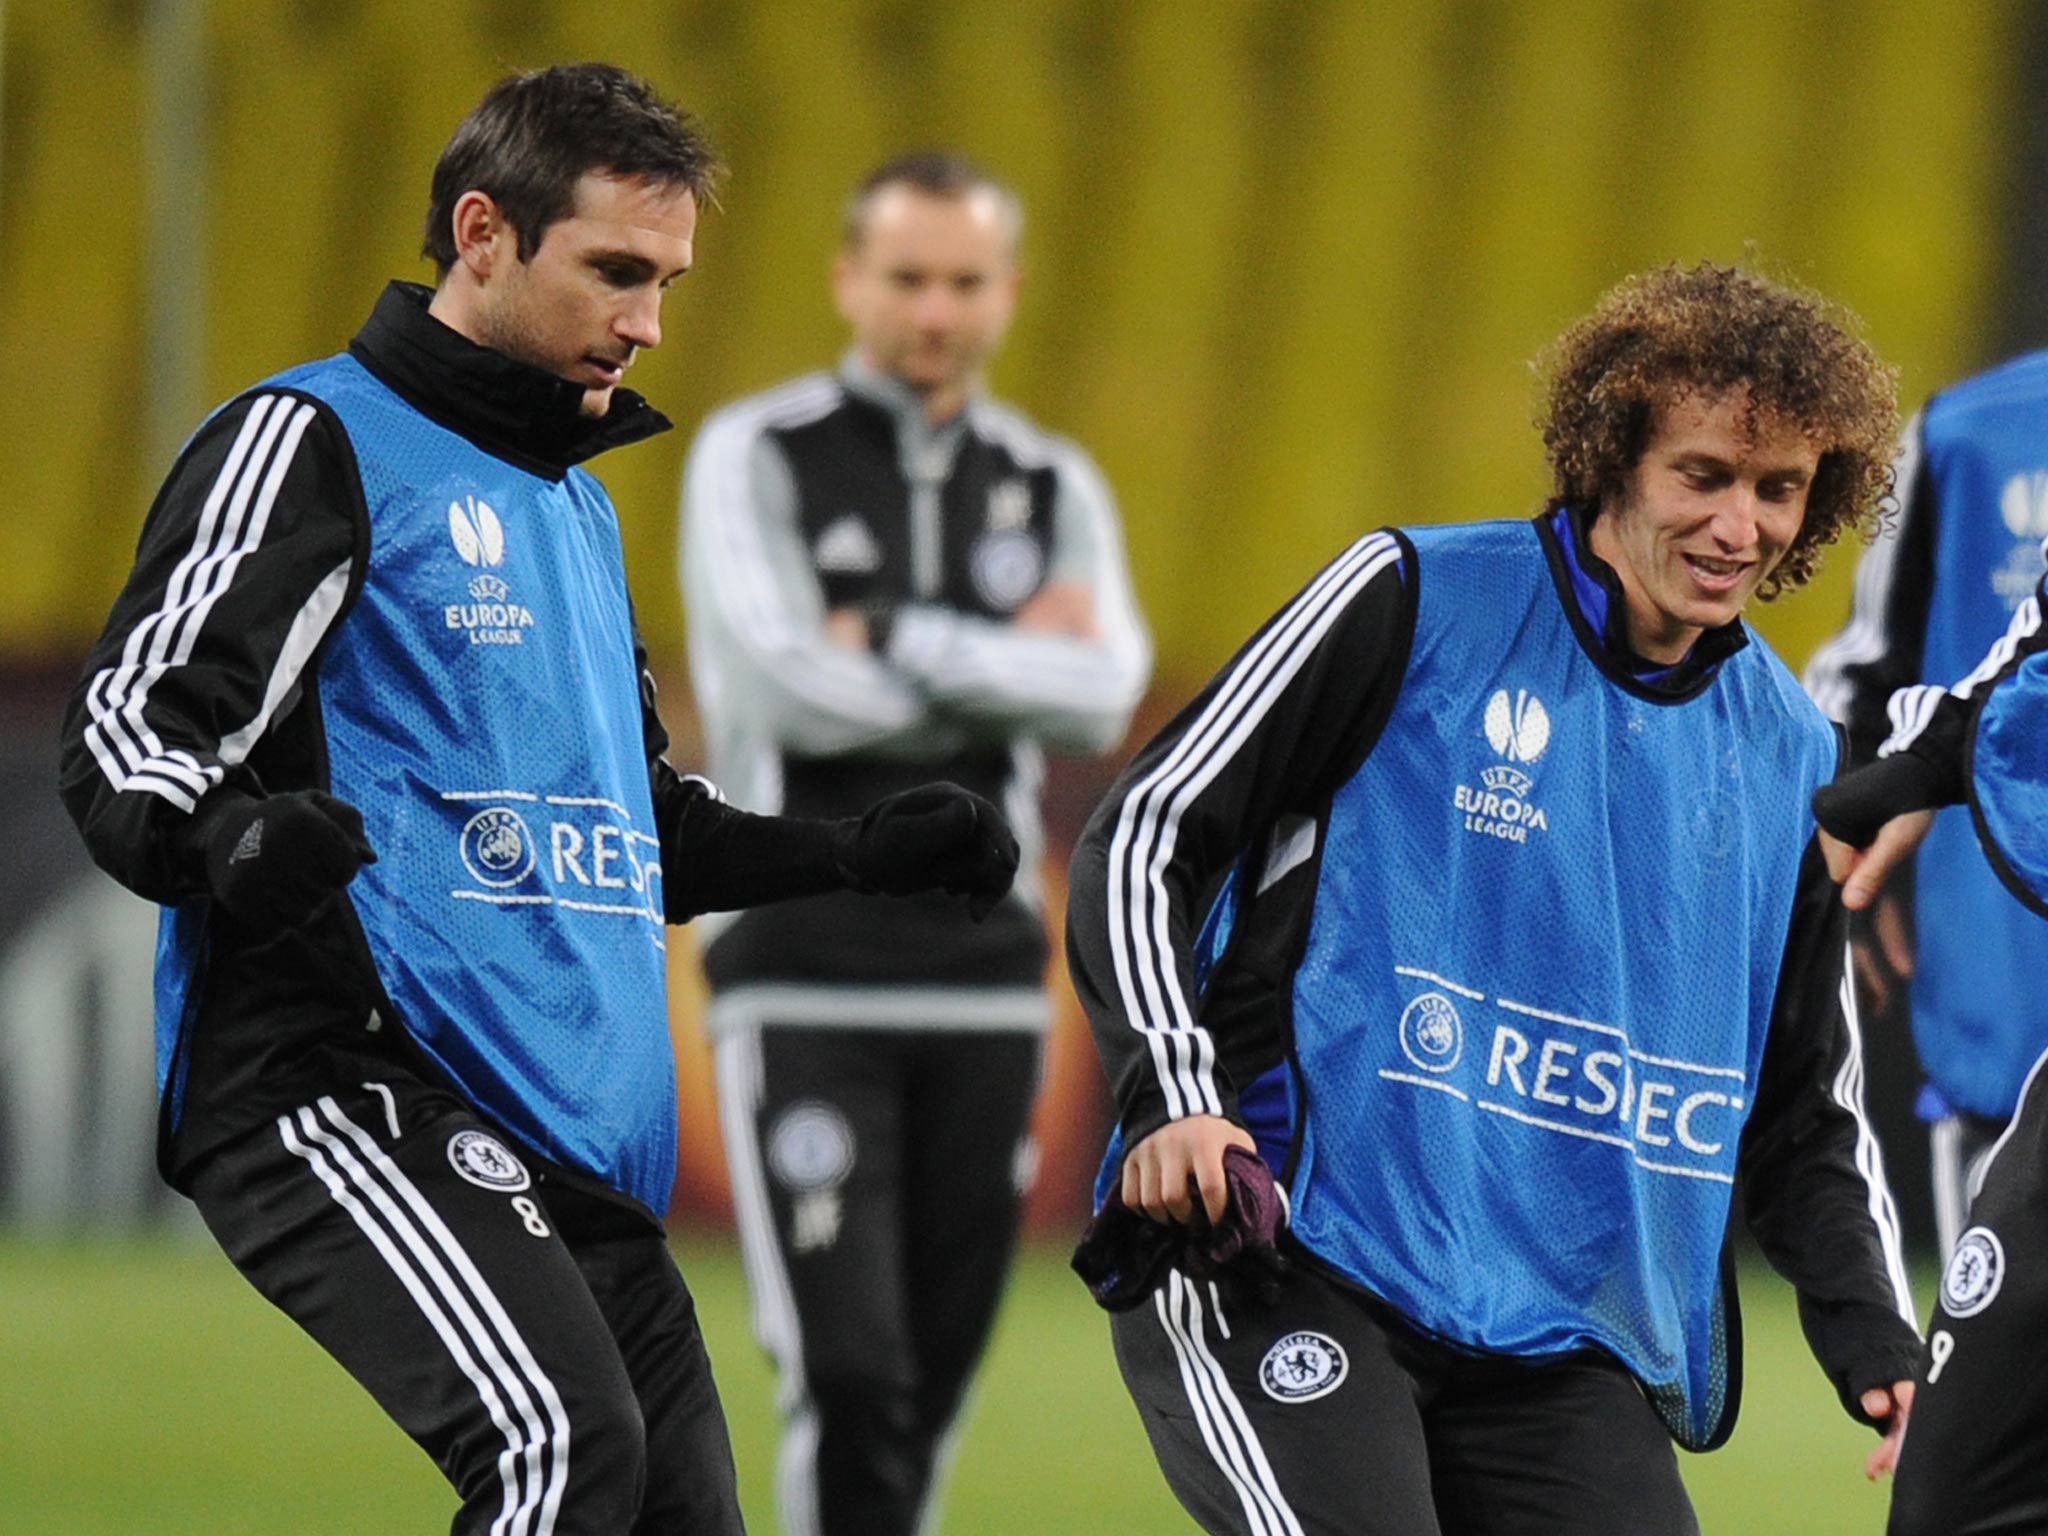 Frank Lampard and David Luiz pictured ahead of their semi-final